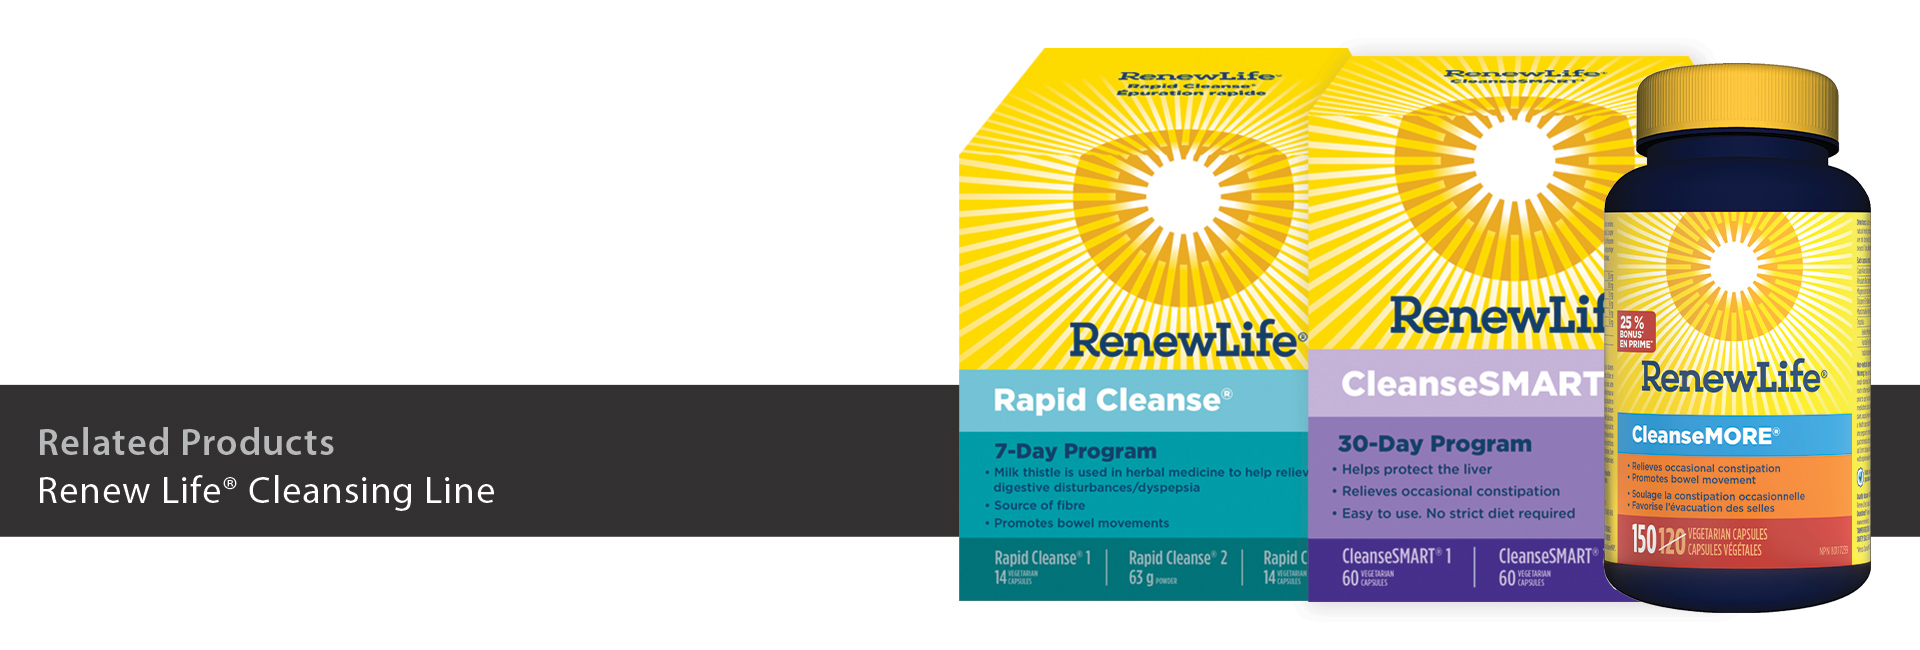 Renew Life Cleansing Line